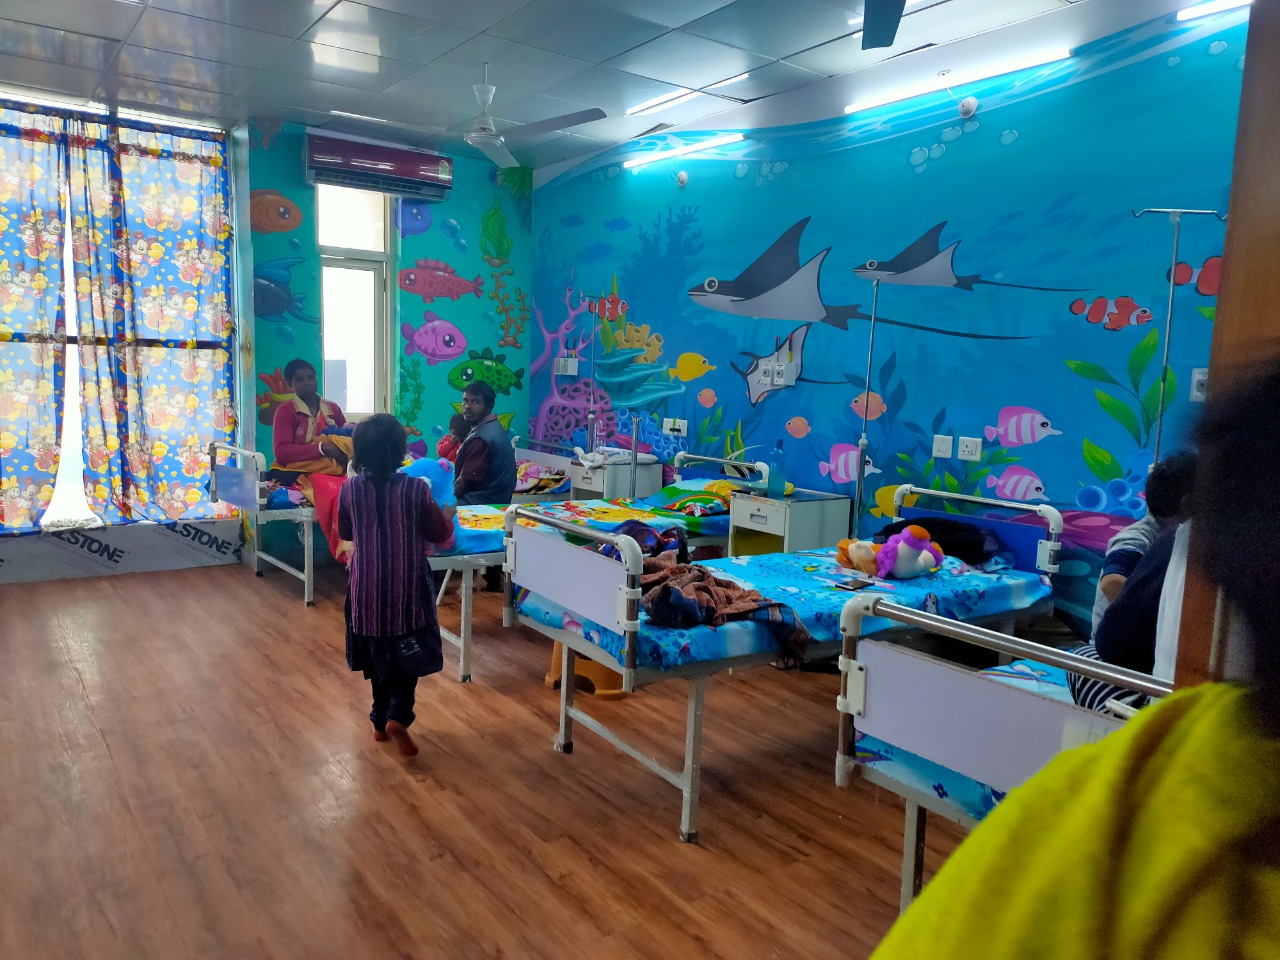 Day care centre at Ranchi - a lifeline for Thalassemic children